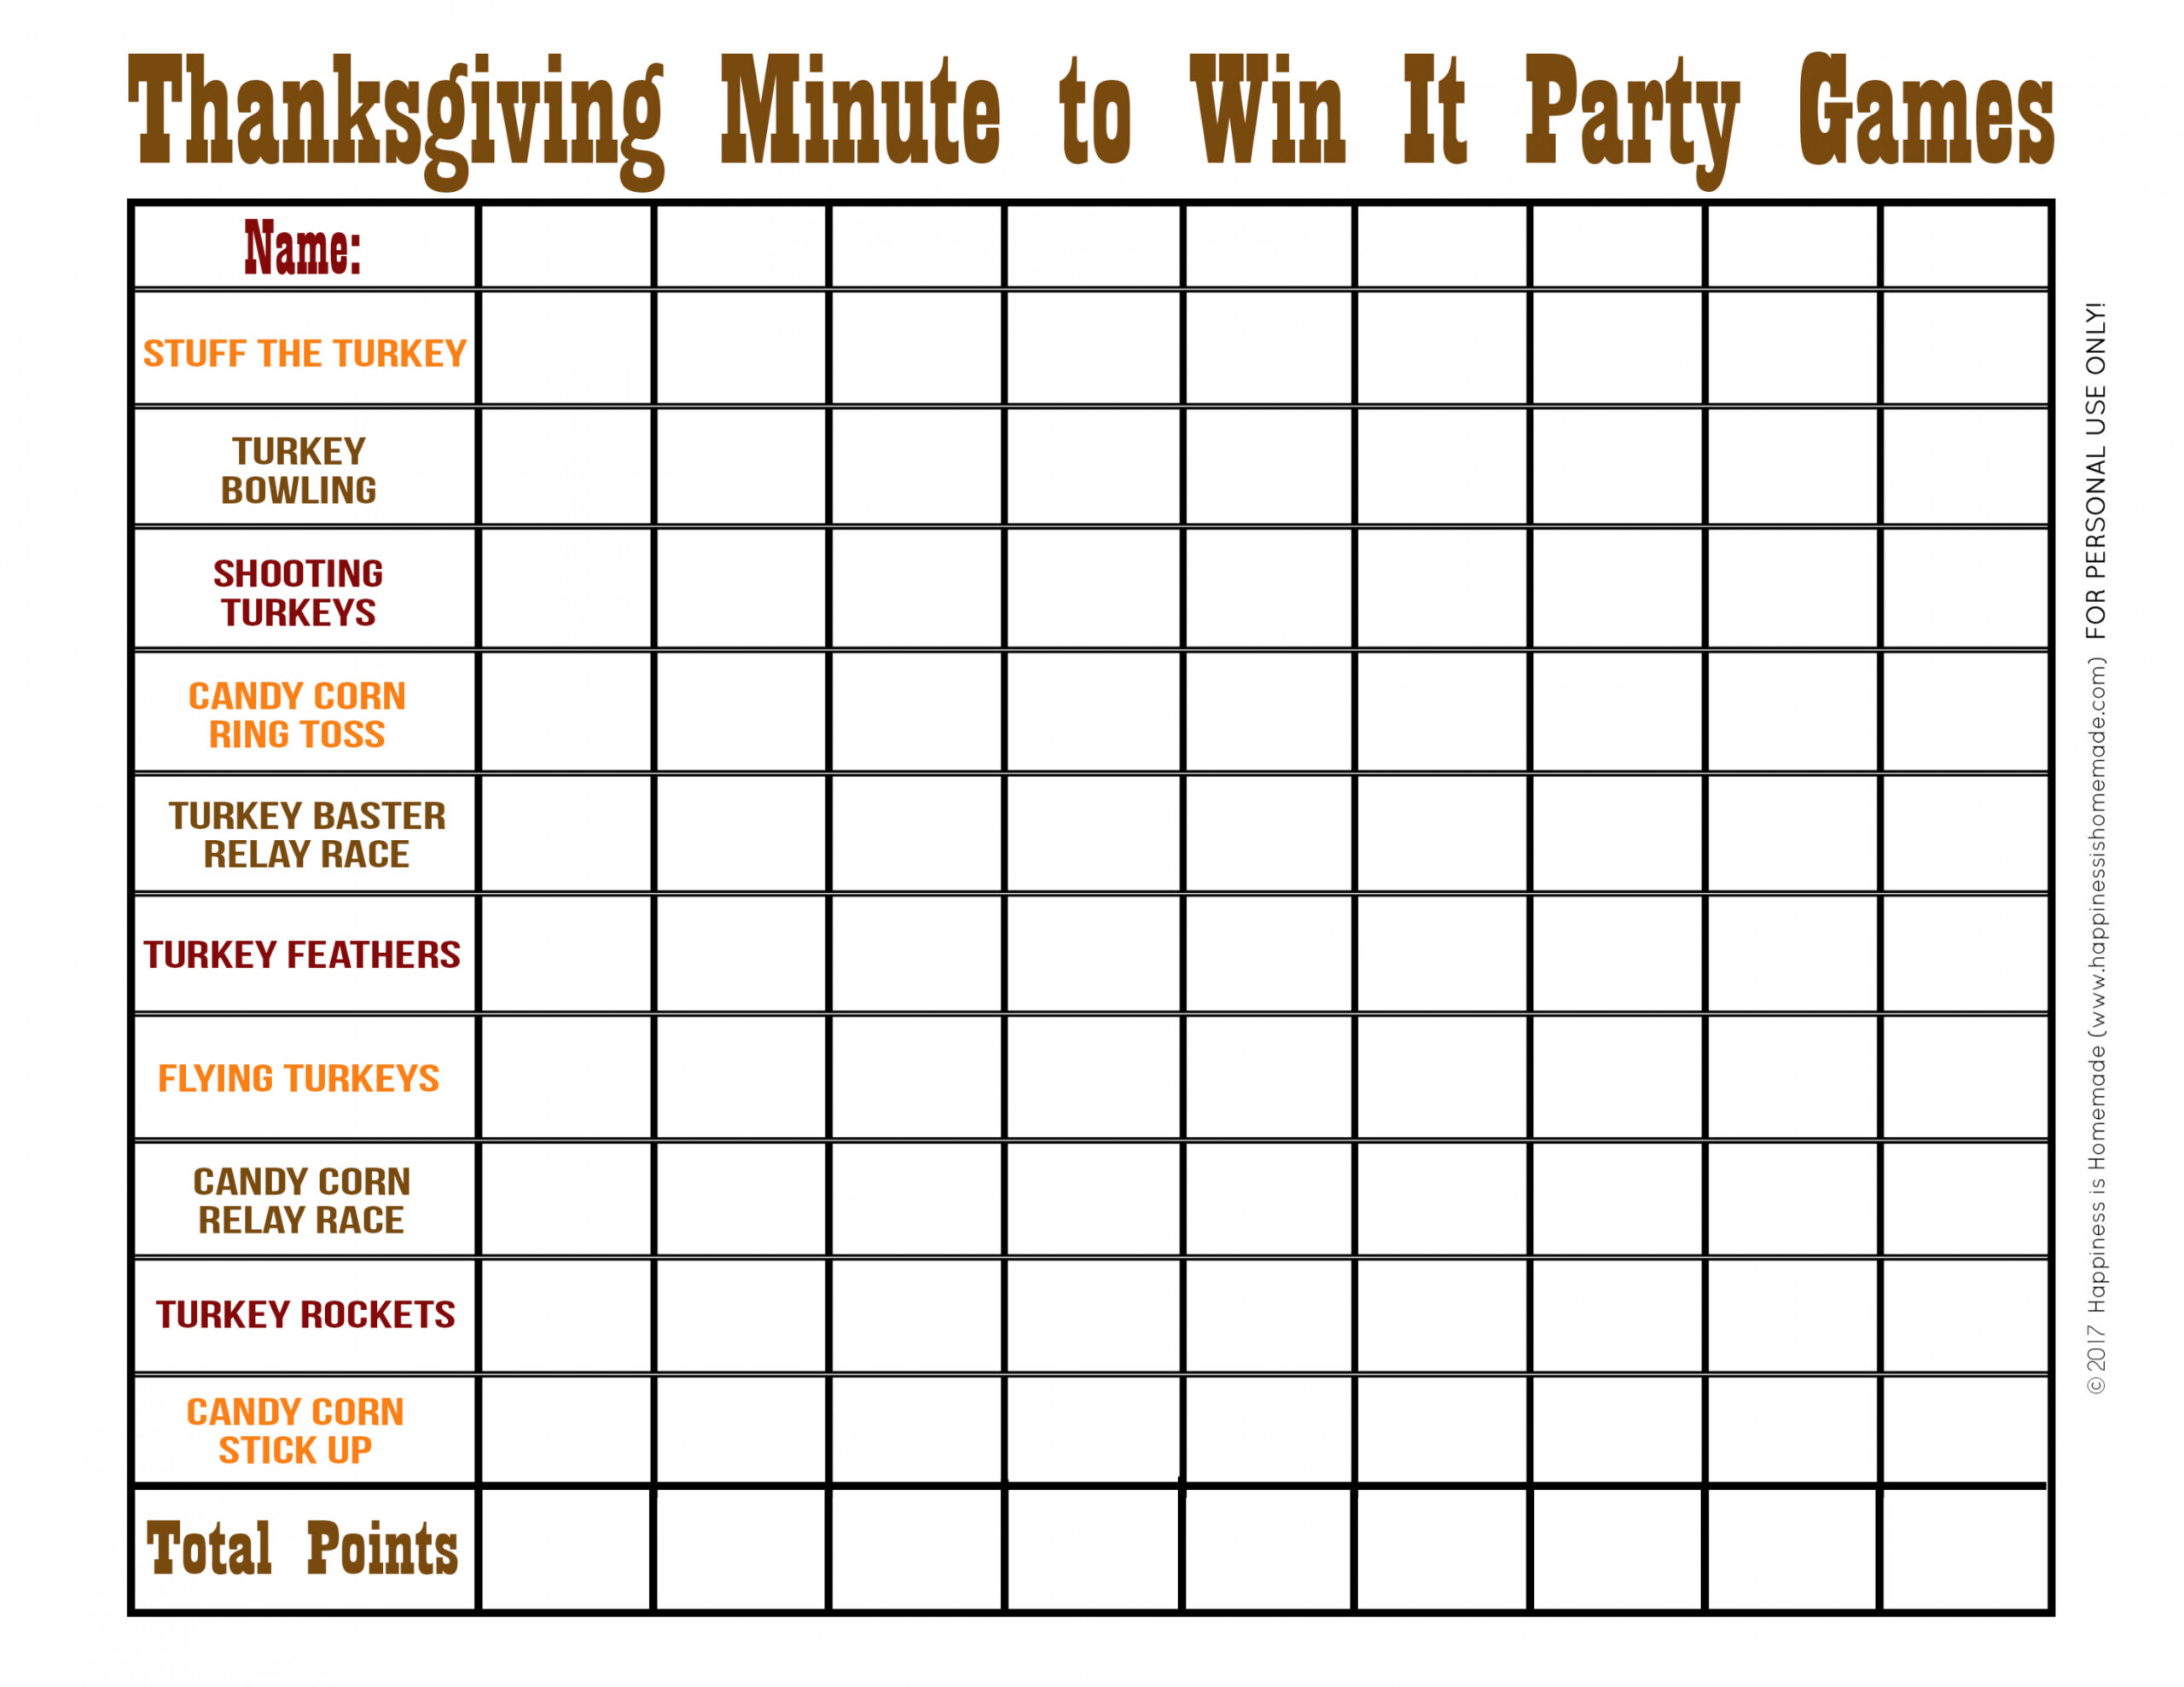 Free Printable Thanksgiving Games - Printable - Thanksgiving Minute to Win It Games - Happiness is Homemade